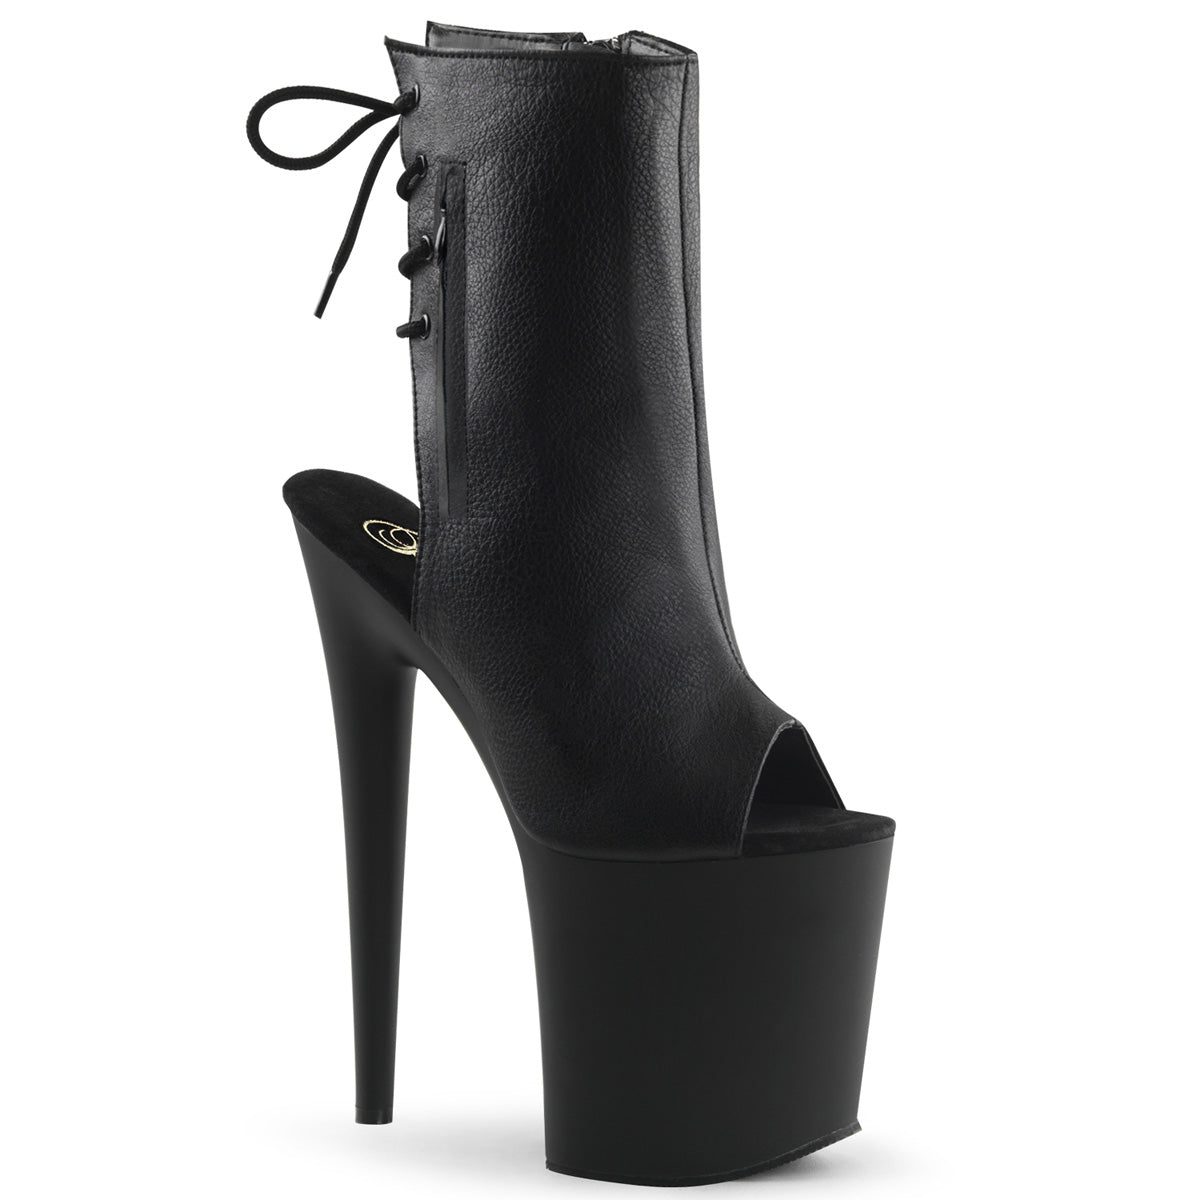 FLAMINGO-1018 Black Leather Cut Out Heel Boots